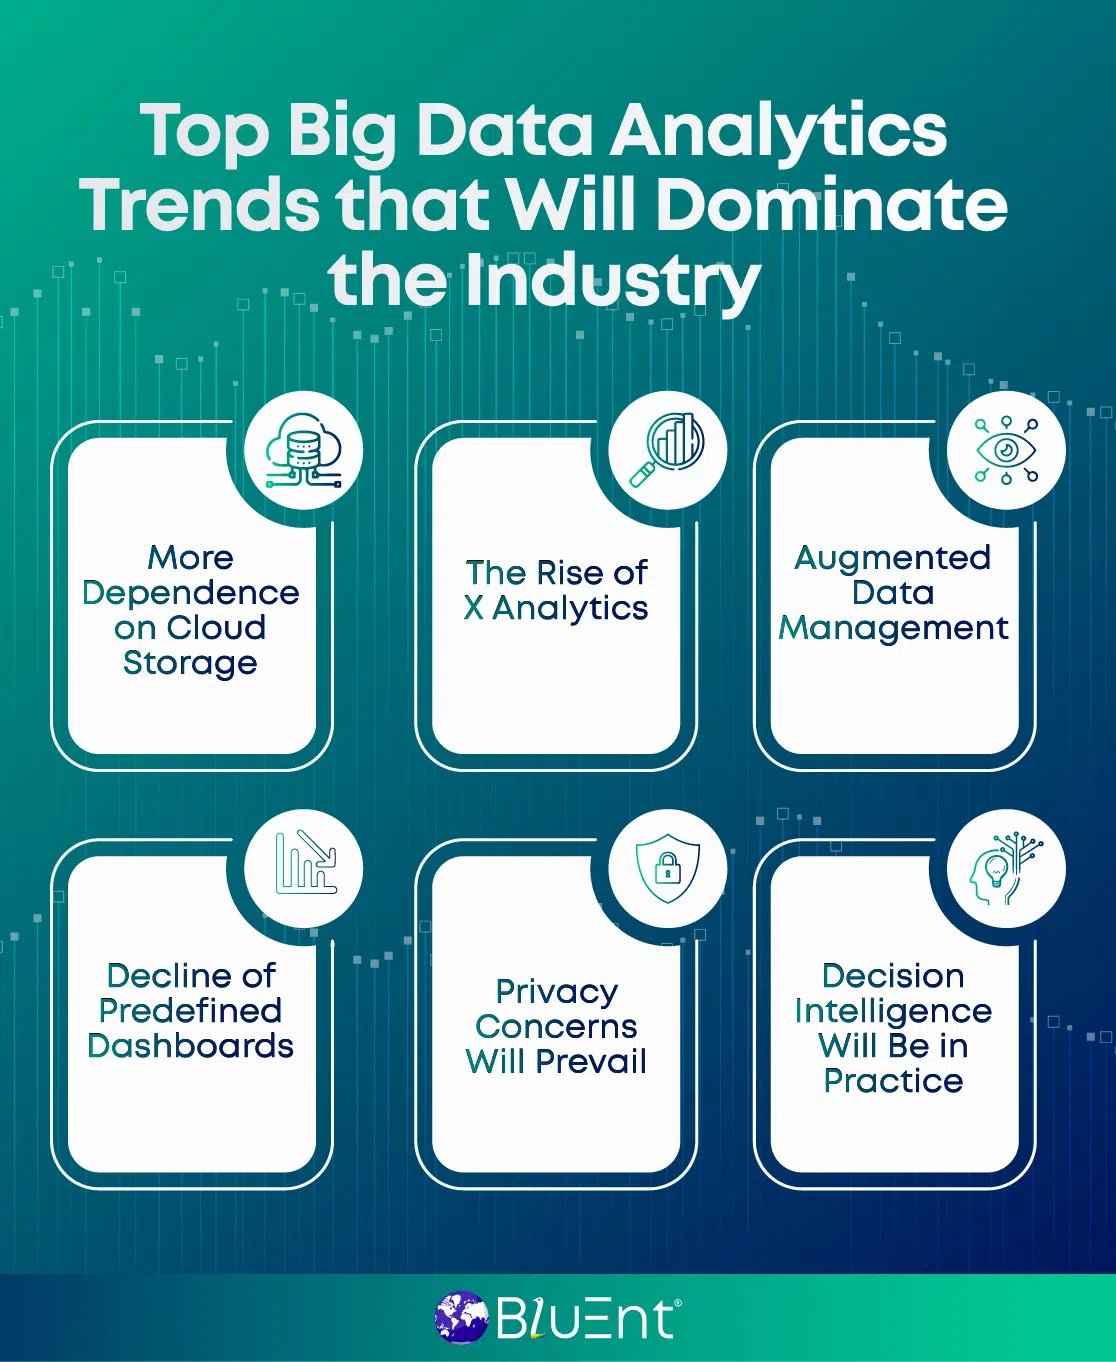 Top big data analytics trends that will rule in the future